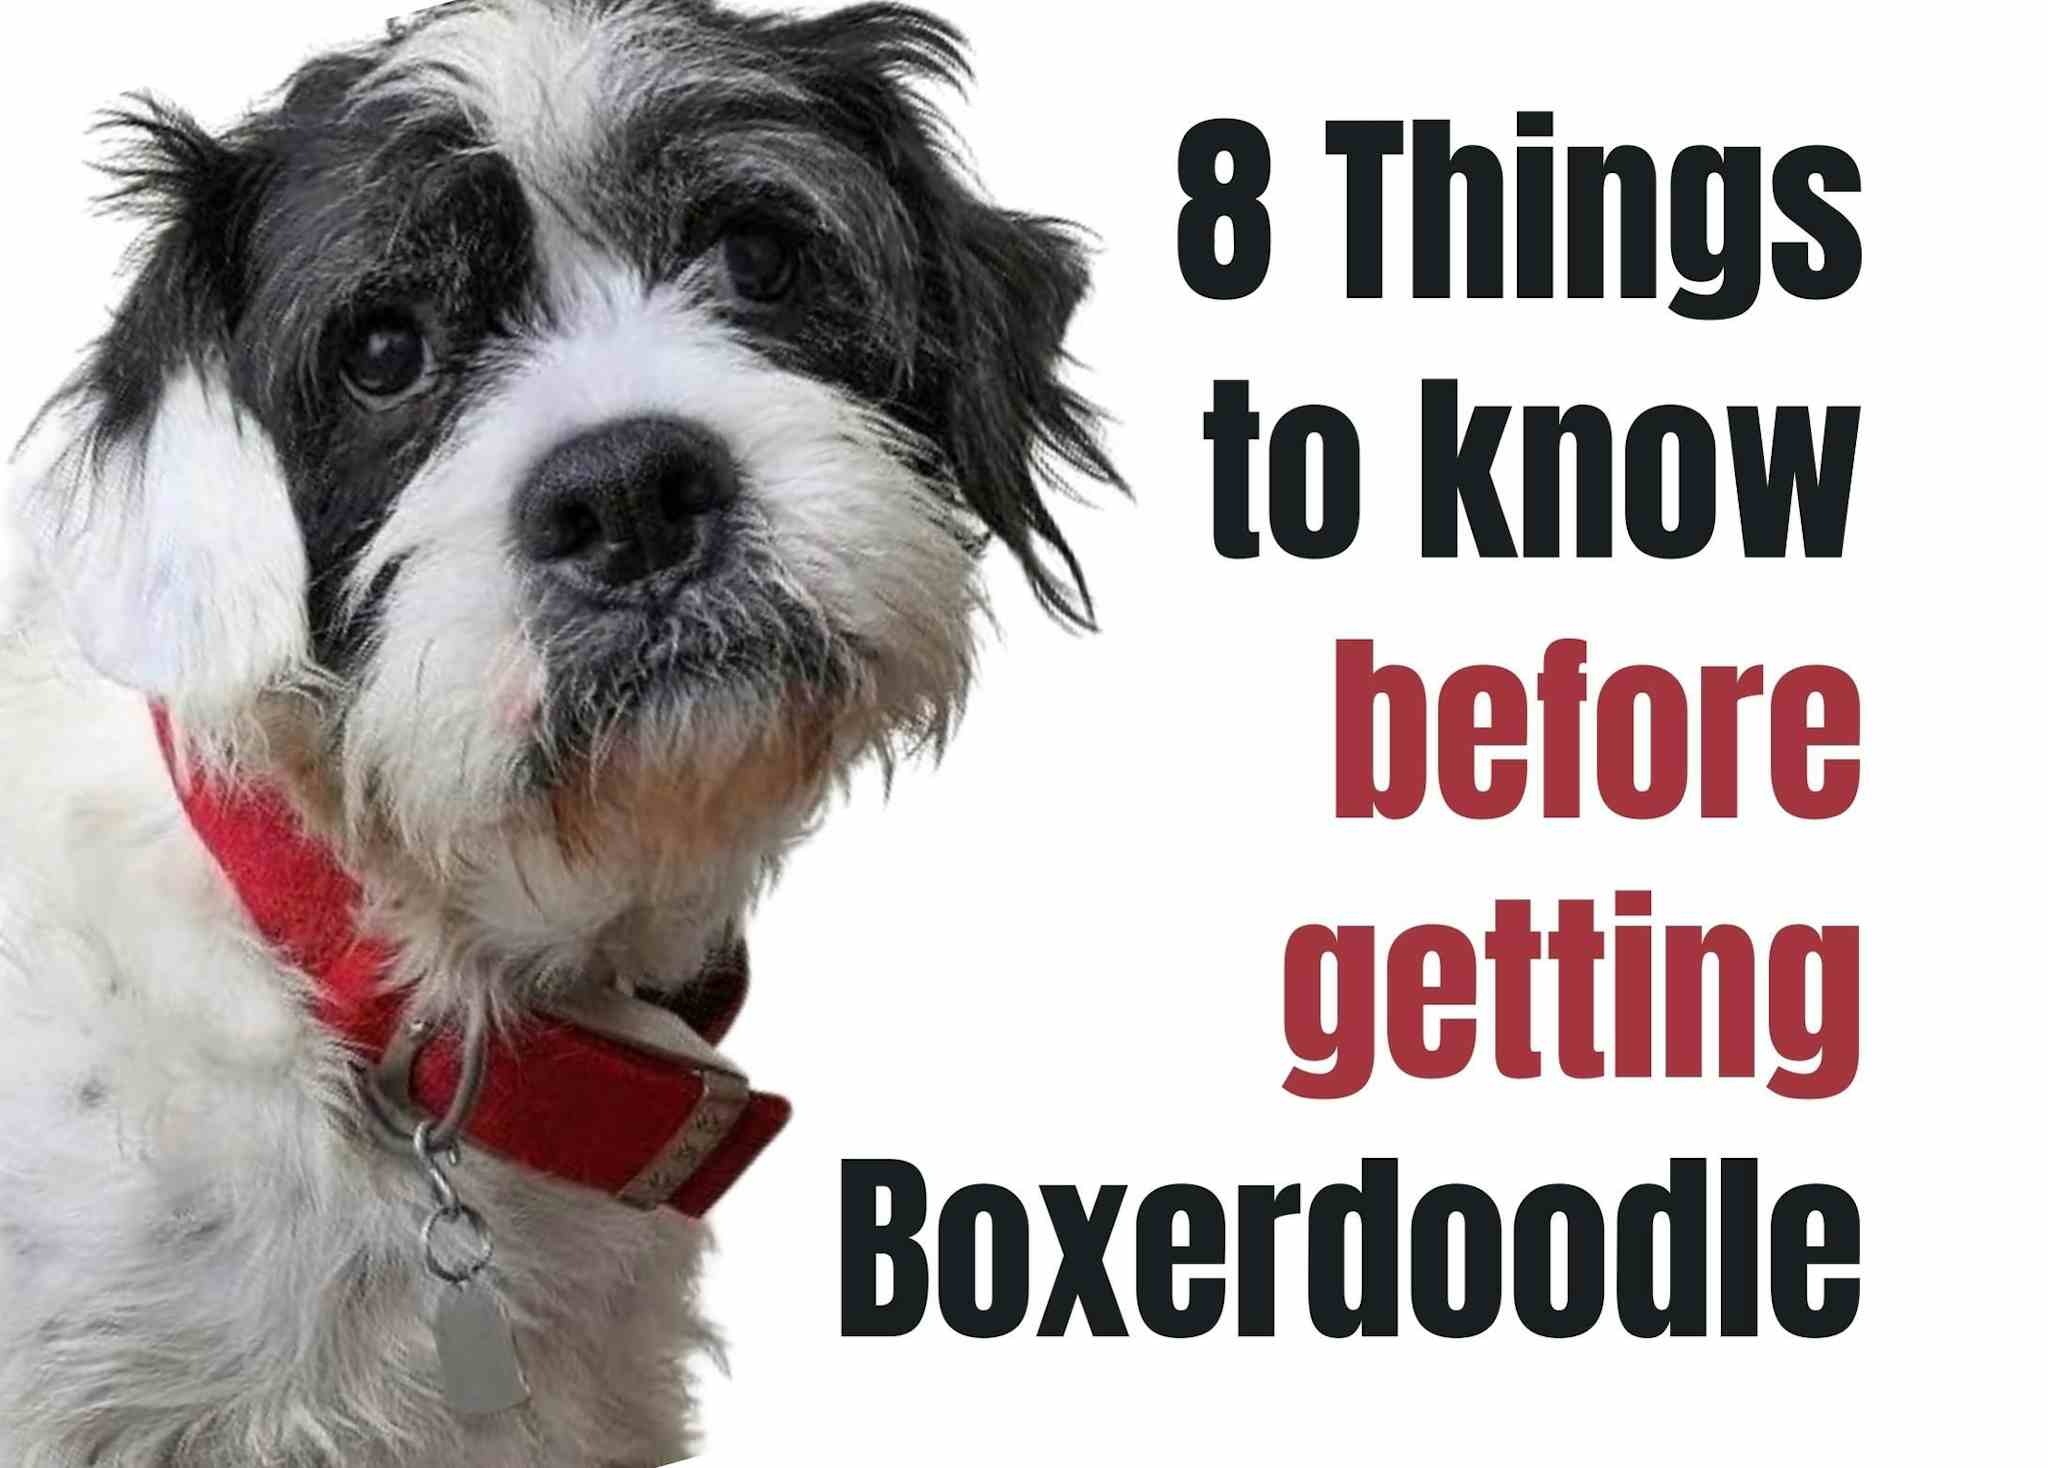 Eight key facts about the Boxerdoodle